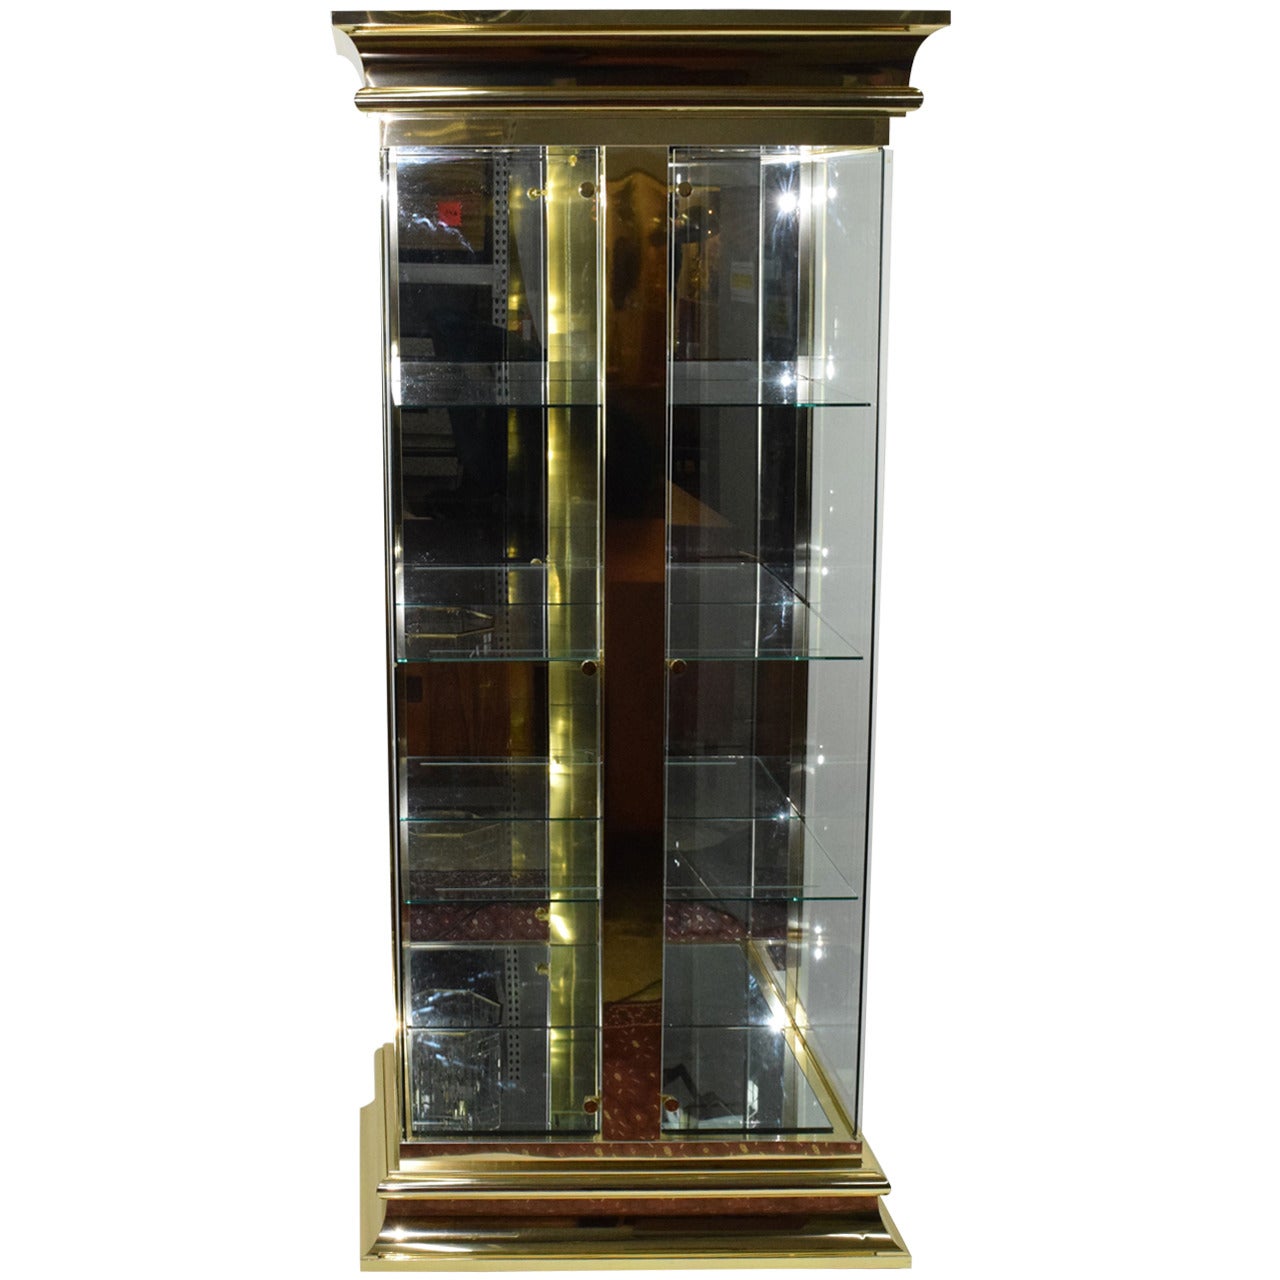 Lighted Display Vitrine/Cabinet in Brass Finish Attributed to Mastercraft